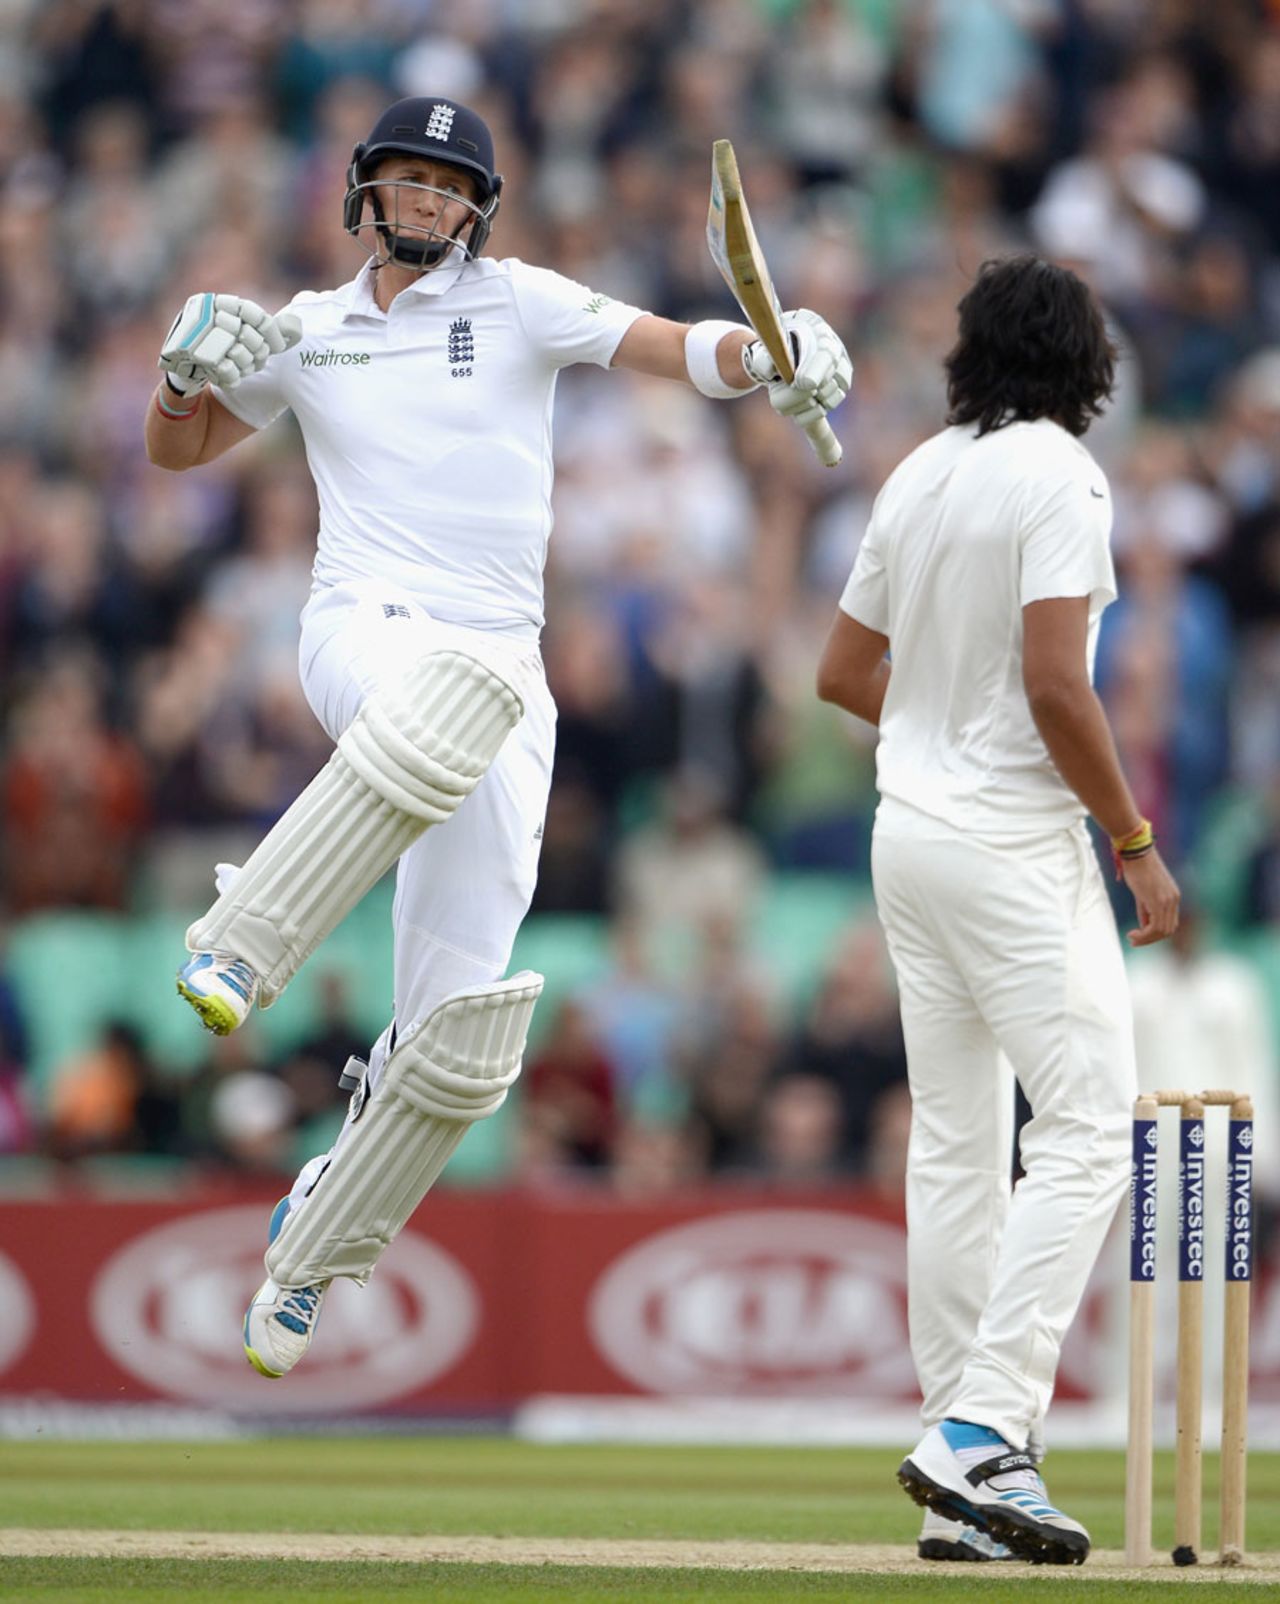 Joe Root leaps into the air after completing his century, England v India, 5th Investec Test, The Oval, 3rd day, August 17, 2014